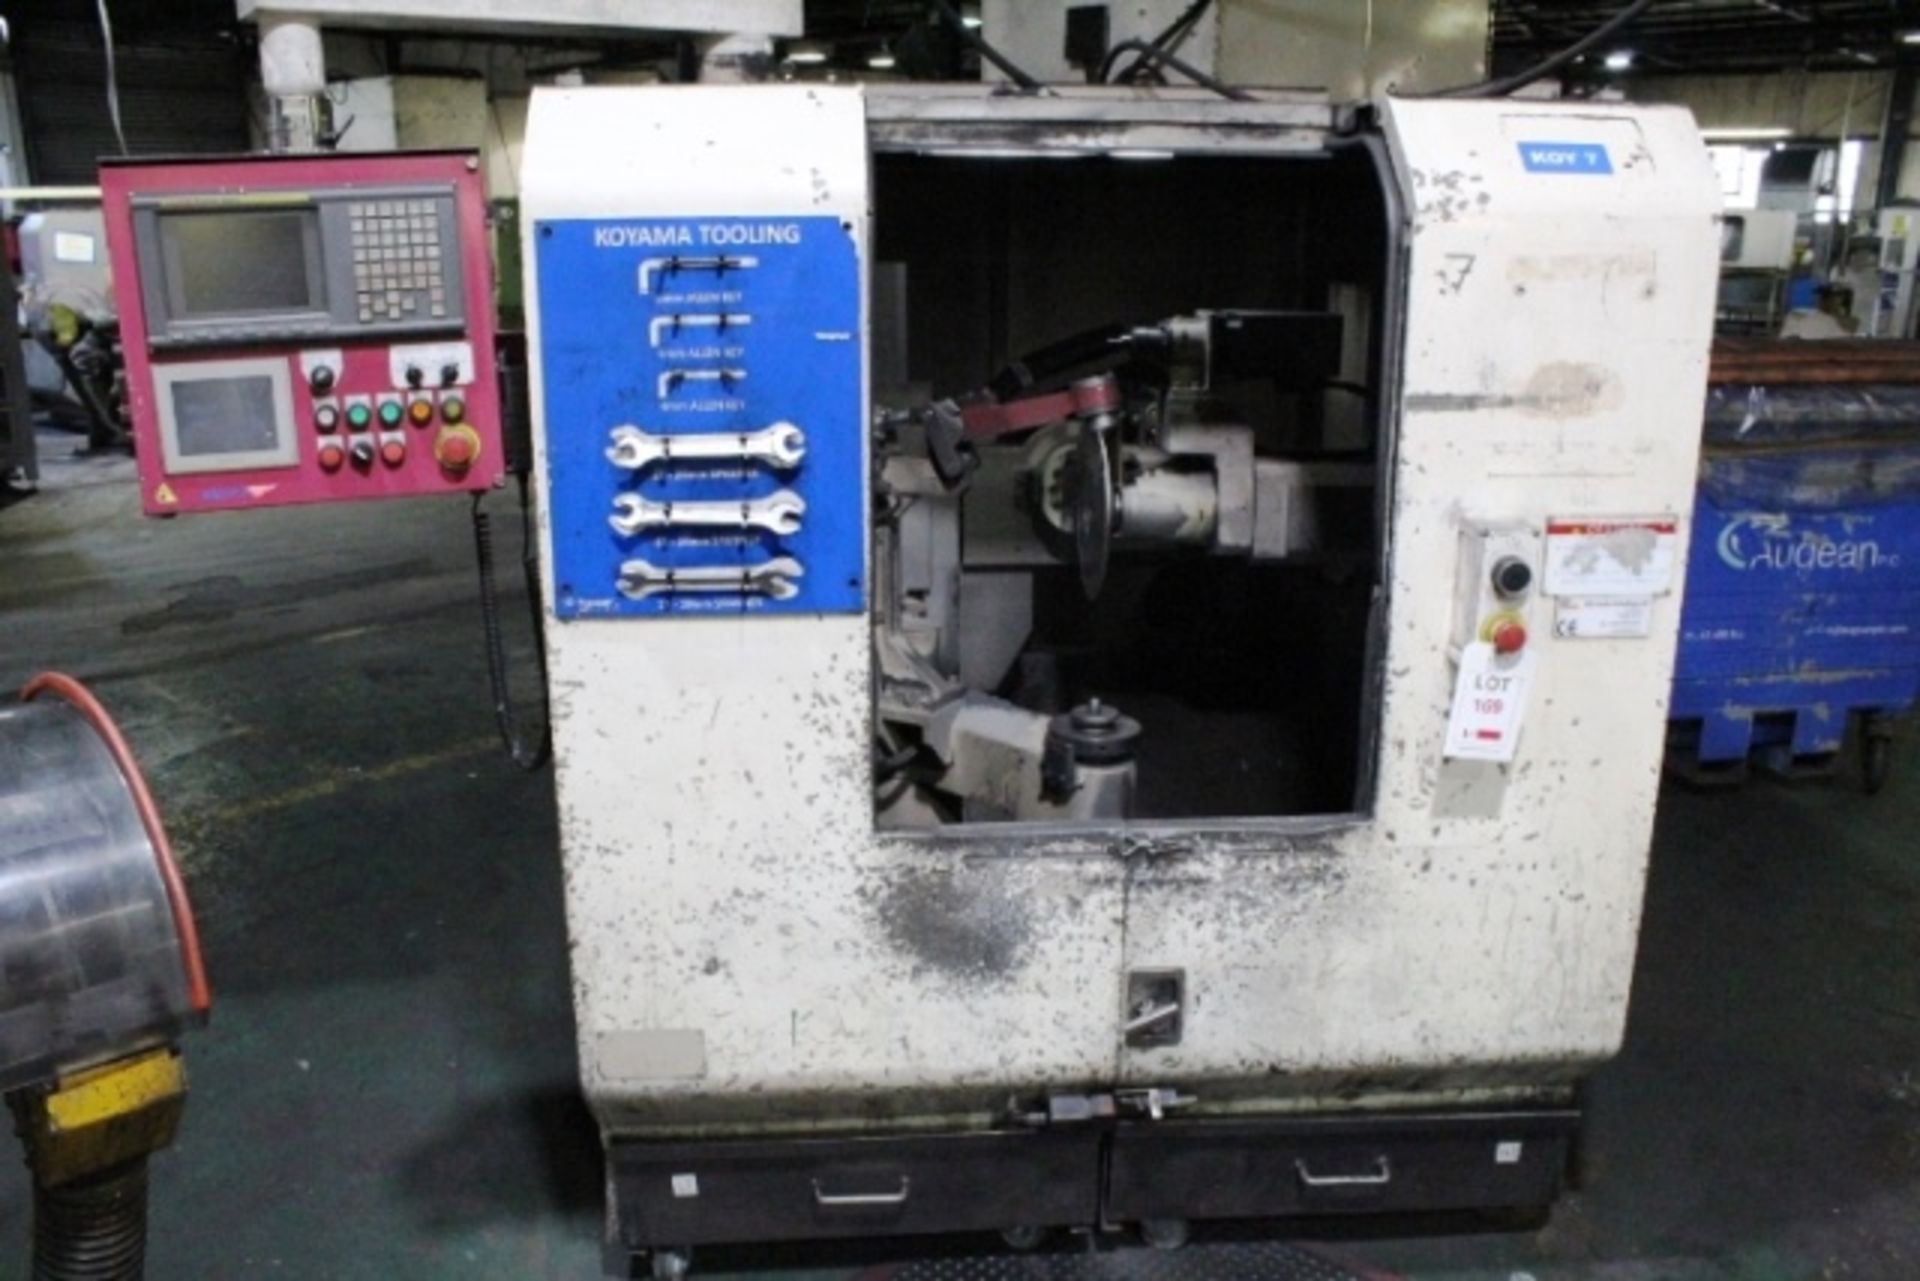 Koyama Barinder 400 automatic twin head grinding machine with rotary arm, model X6-FDS22R-443GRS,